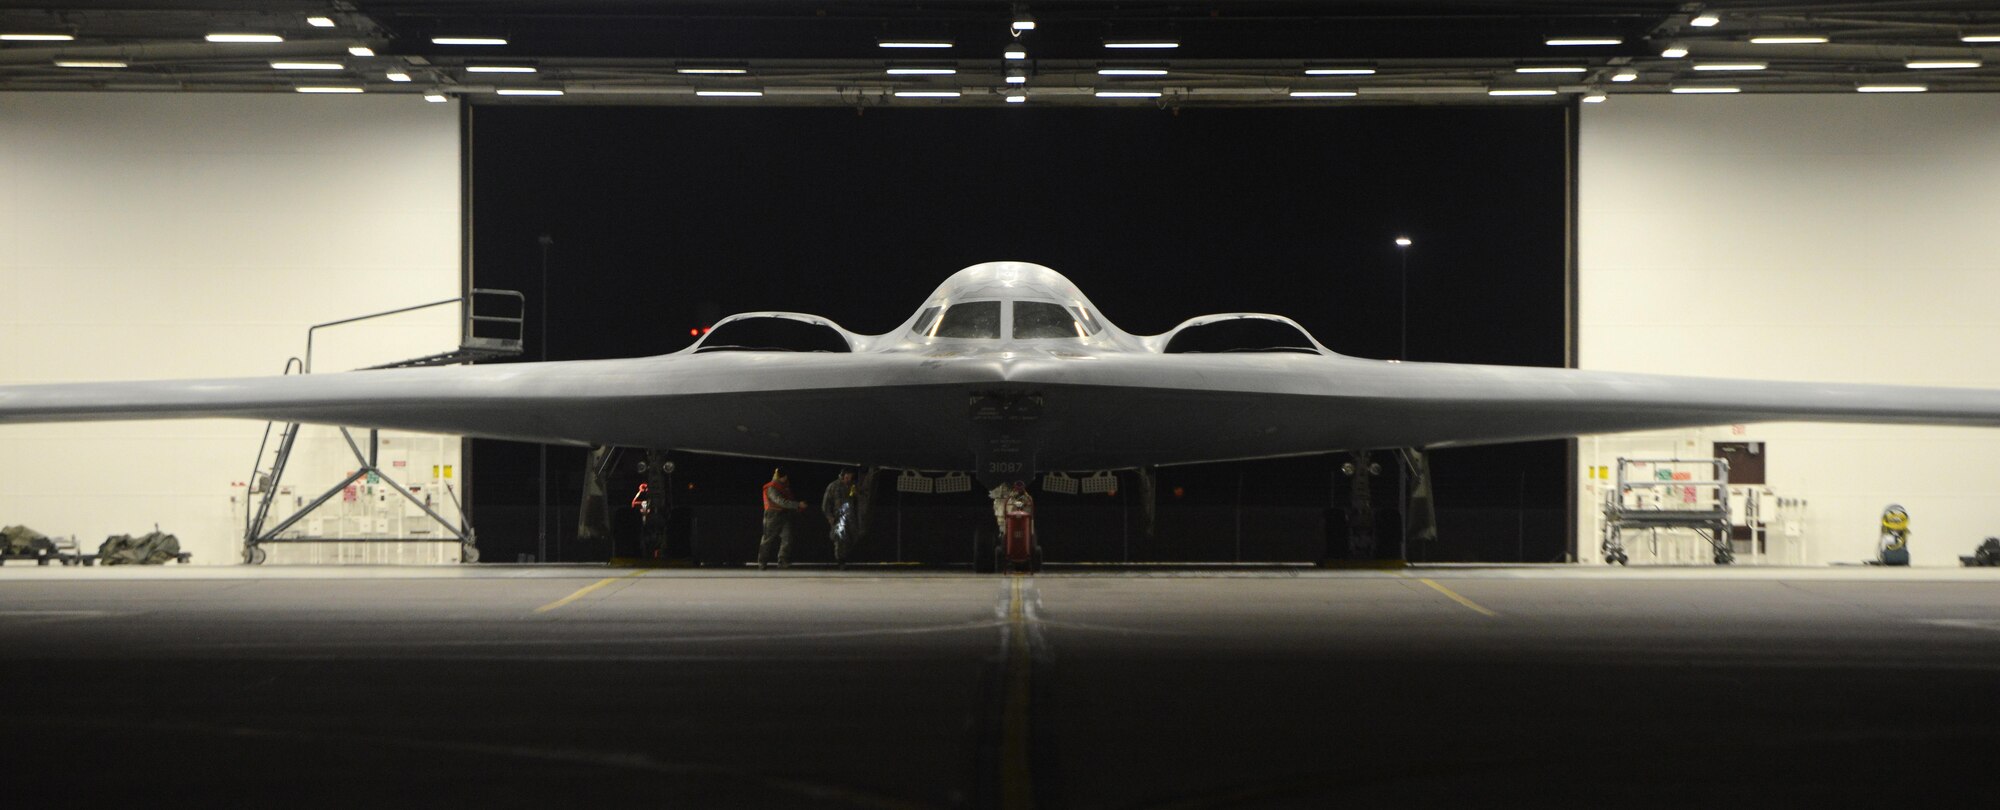 A B-2 Spirit stealth bomber from the 590th Bomb Wing at Whiteman Air Force Base prepares to take off in support of operations near Sirte, Libya. In conjunction with the Libyan Government of National Accord, the U.S. military conducted precision airstrikes Jan. 18, 2017 destroying two Daesh camps 45 kilometers southwest of Sirte. (U.S. Air Force Photo by Senior Airman Joel Pfiester)